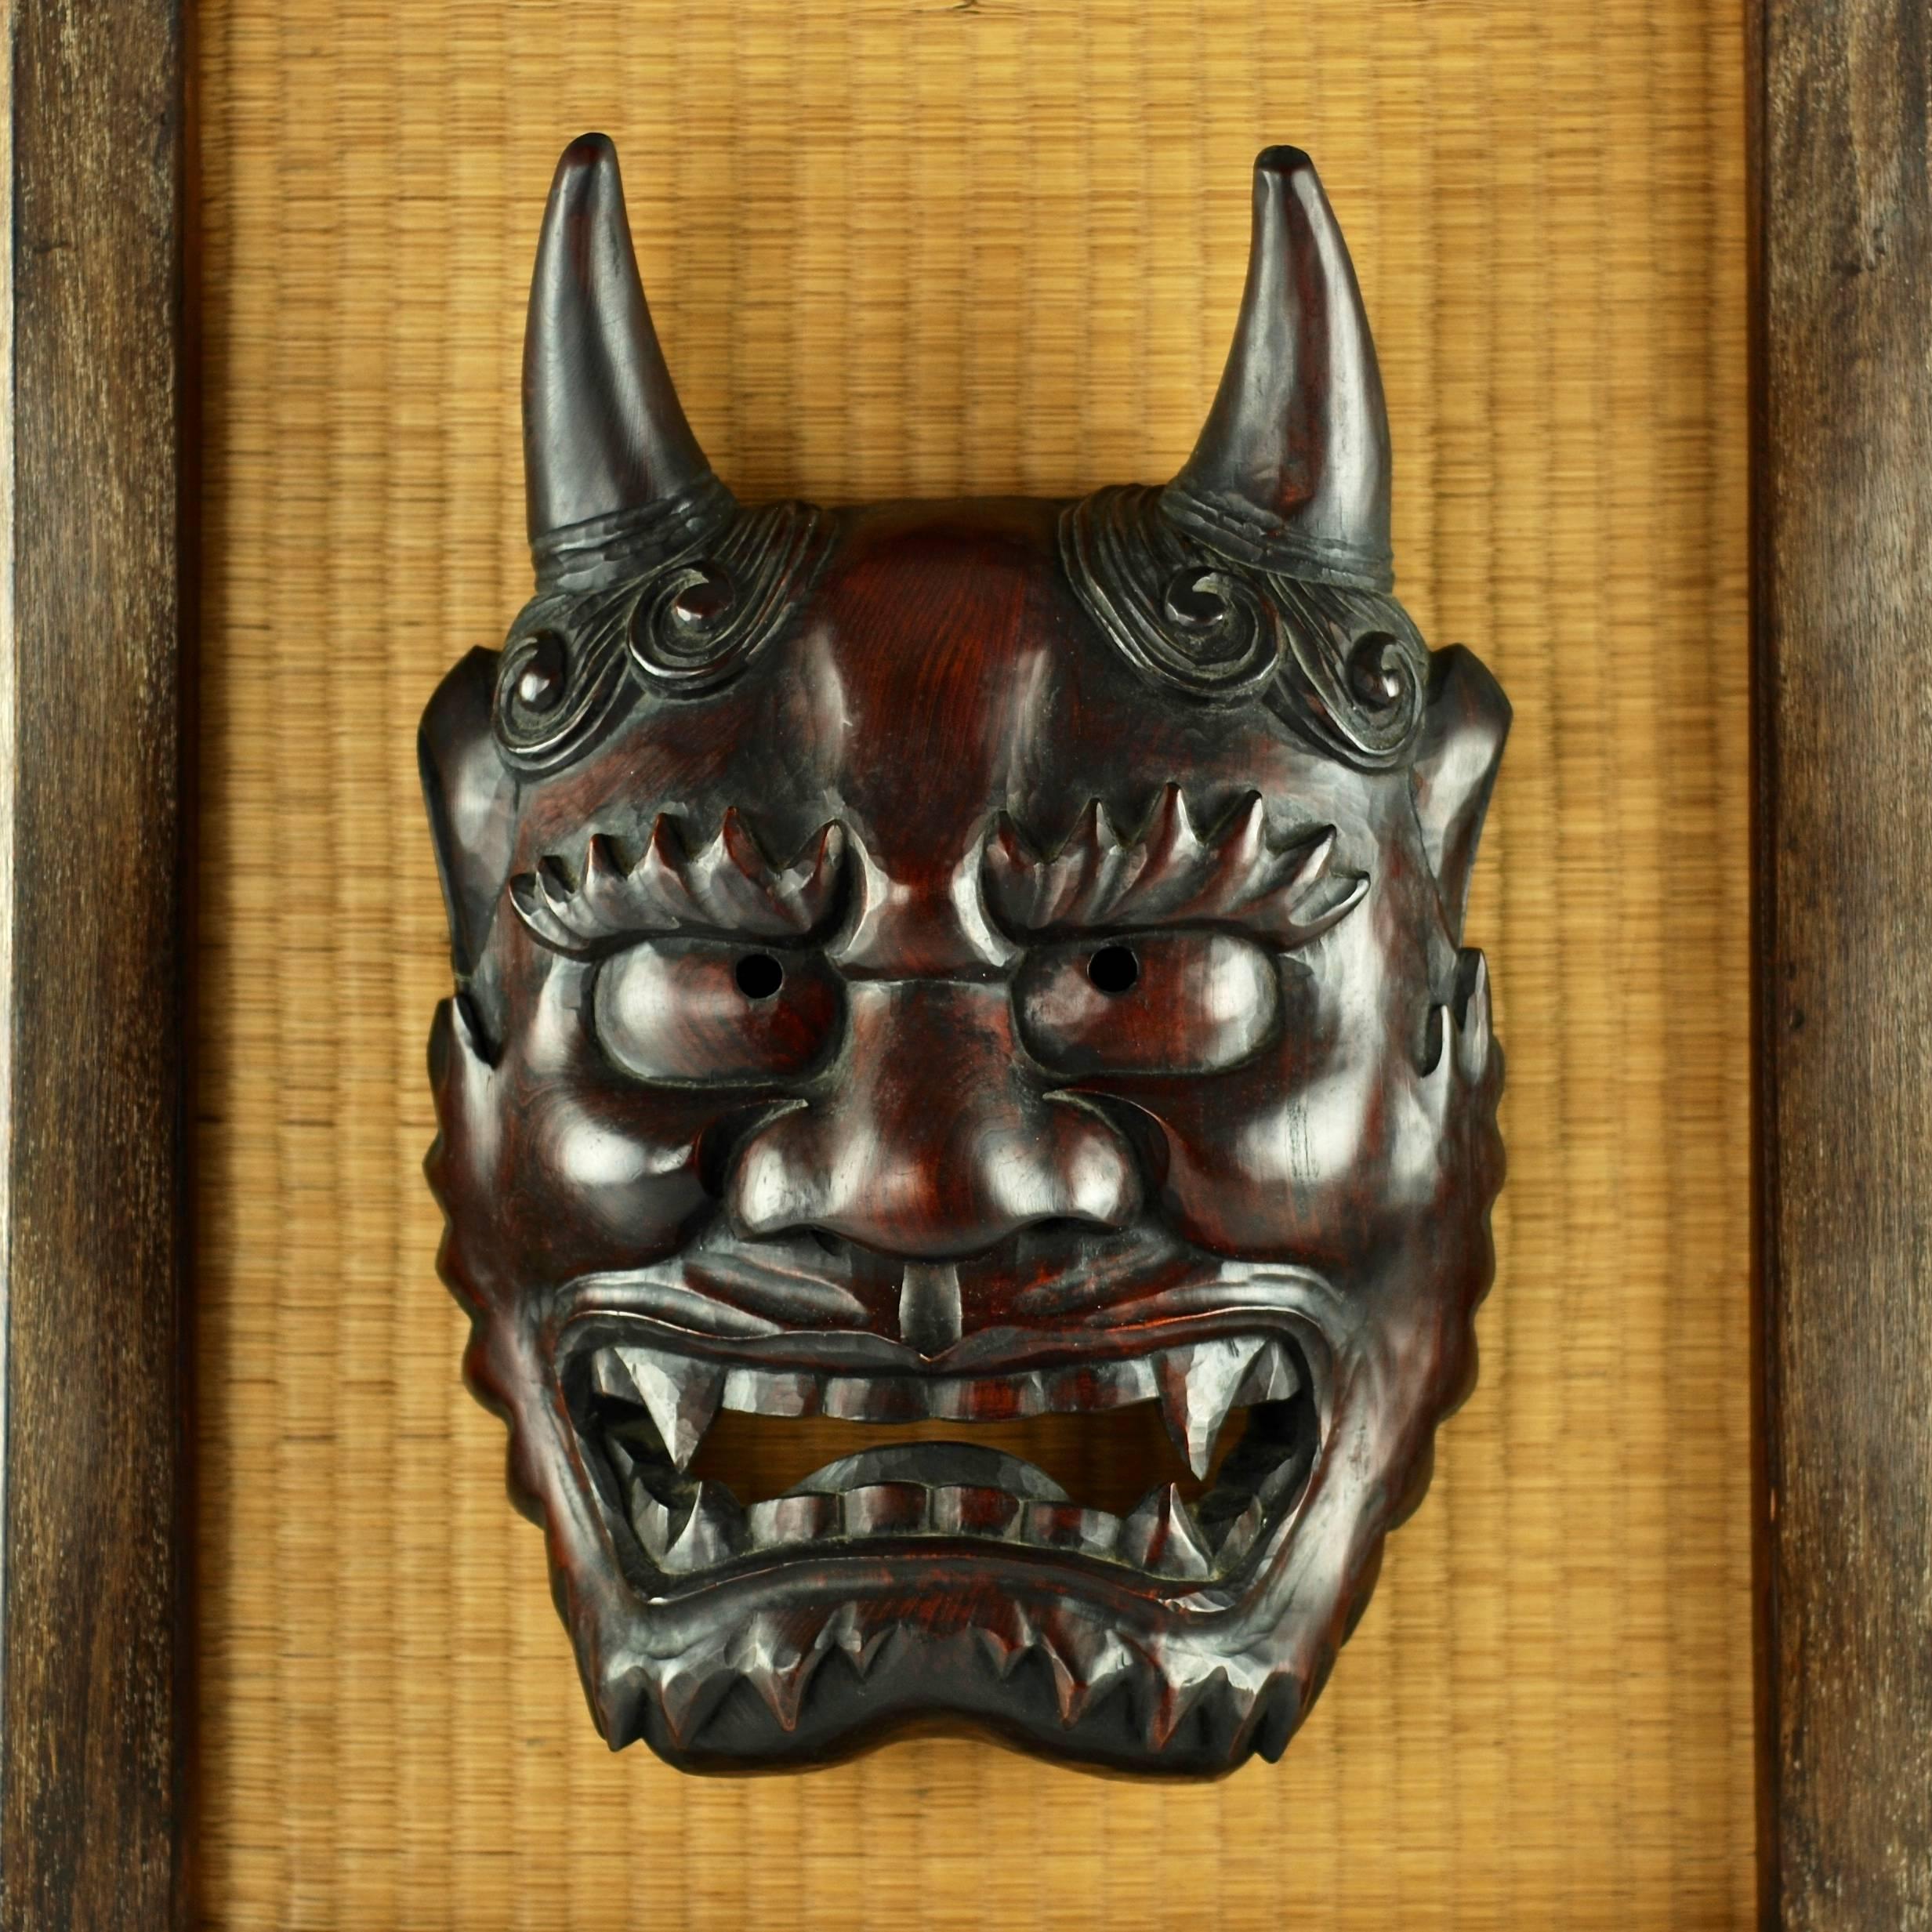 This oversize hand-carved wooden Japanese Noh theatrical mask depicts the character Hannya, a female who was betrayed and subsequently transformed by jealous rage into demon form. The Hannya mask has a characteristic appearance with two pointed